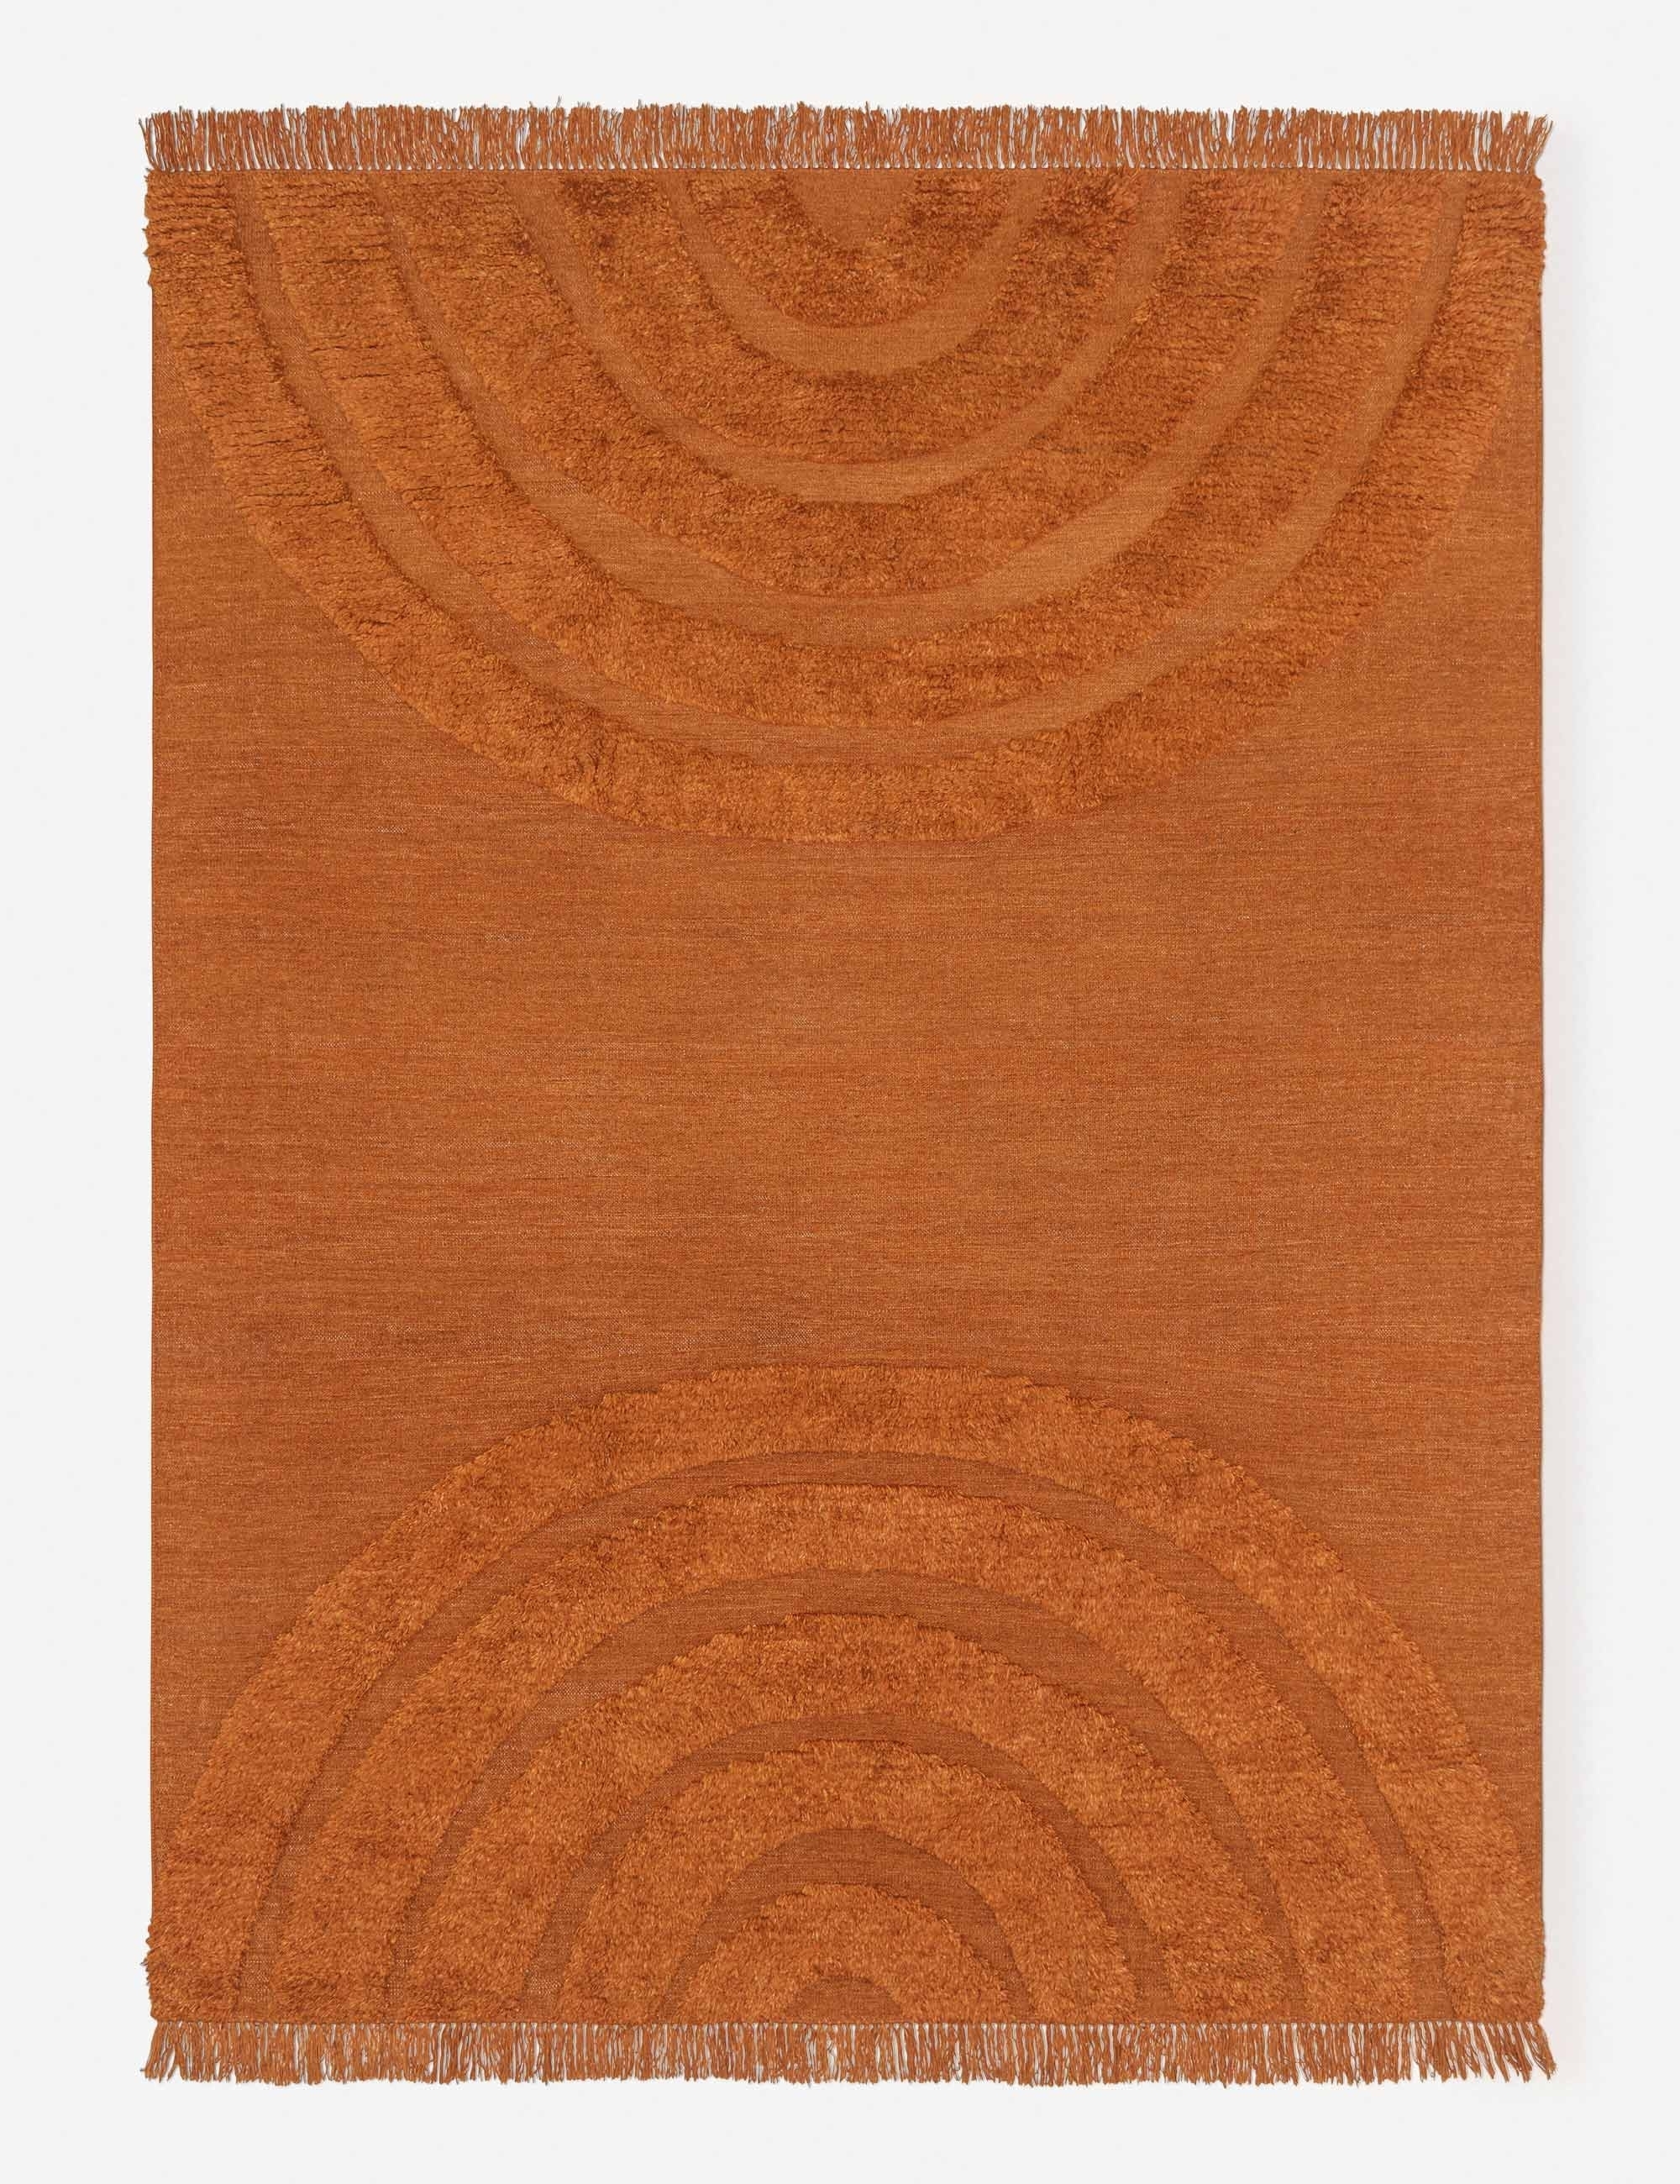 Arches Hand-Knotted Wool Rug by Sarah Sherman Samuel - Image 12